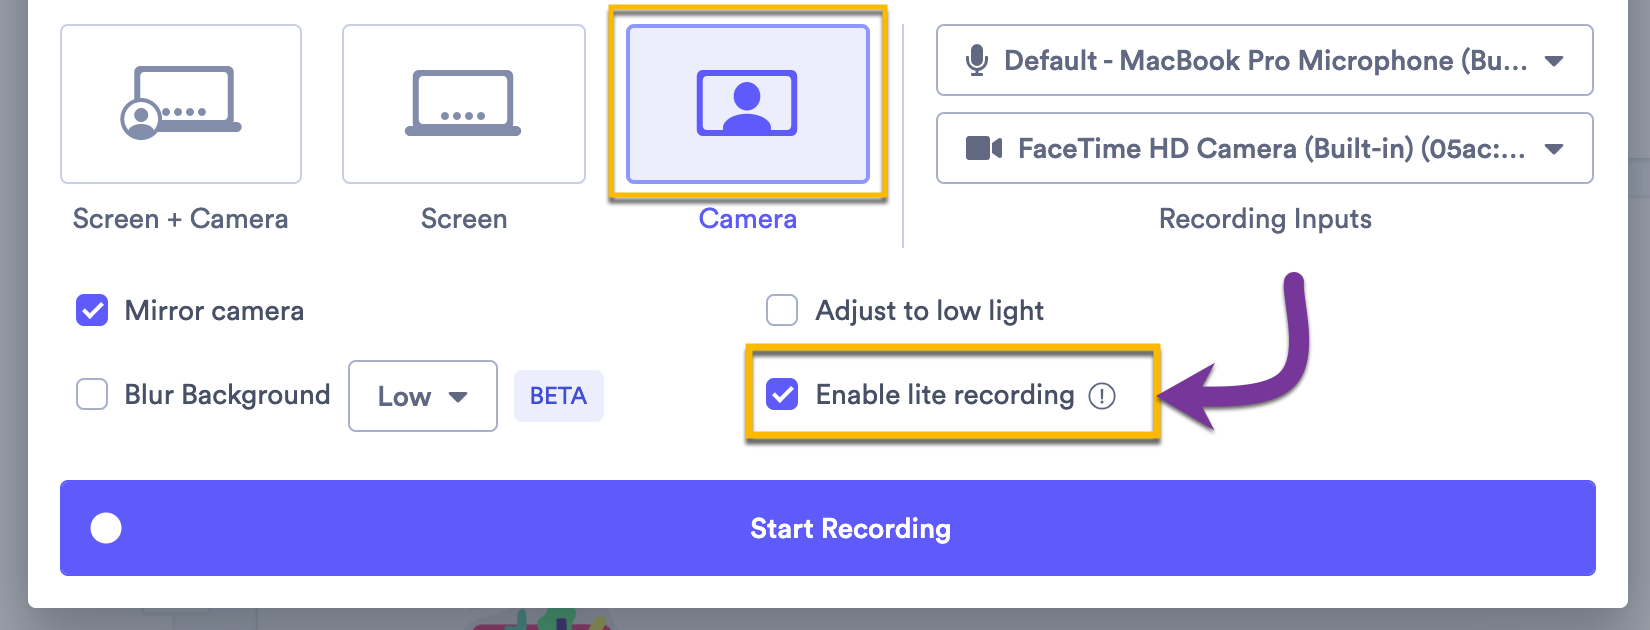 Enabling the Lite Recording setting in Camera capture mode